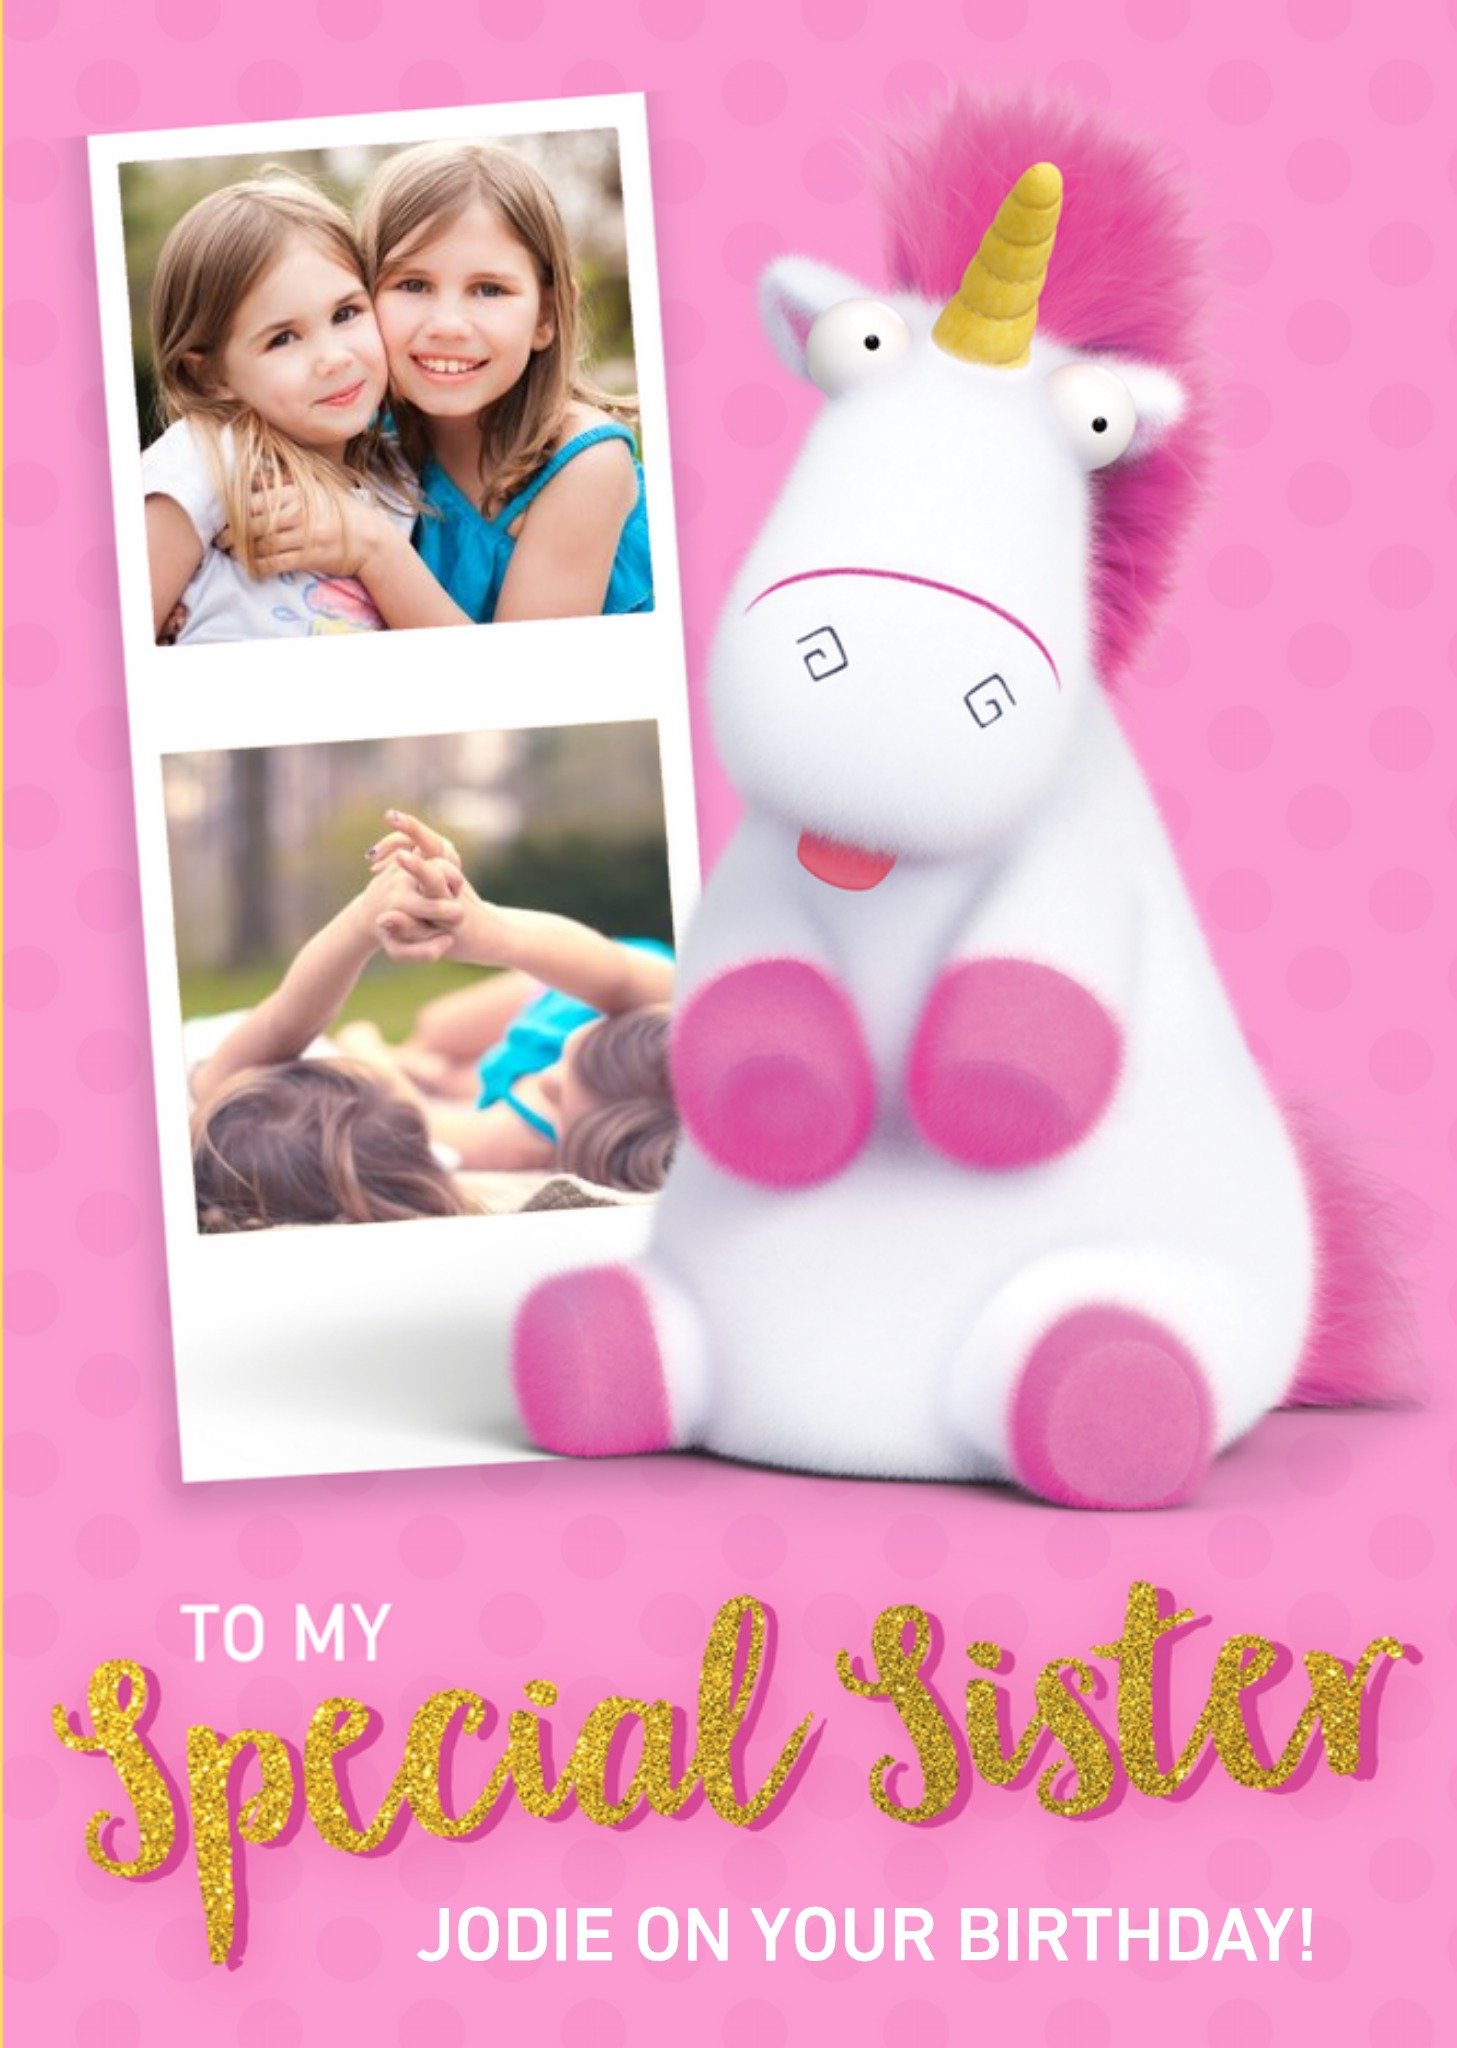 Sister Birthday Cards - Despicable Me - Unicorn - It's So Fluffy, Large